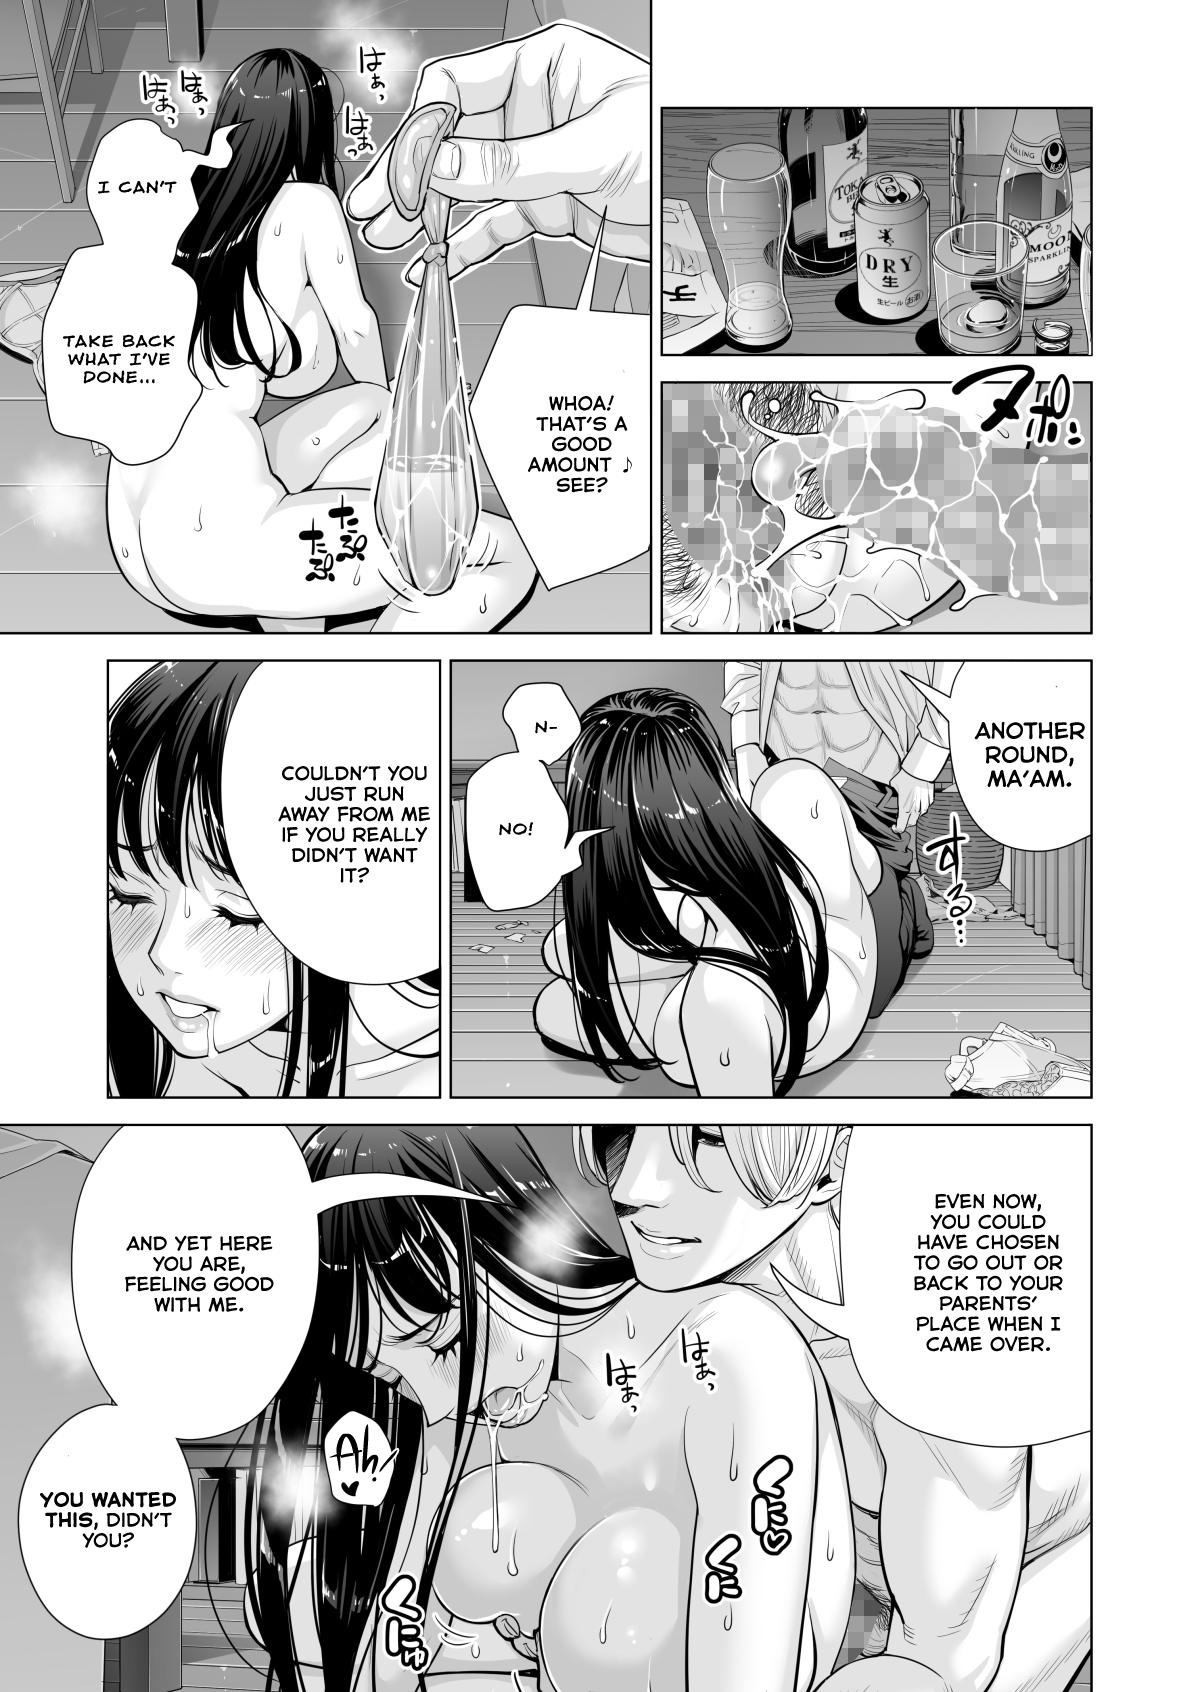 [HGT Lab (Tsusauto)] Tsukiyo no Midare Zake (Kouhen) Moonlit Intoxication ~ A Housewife Stolen by a Coworker Besides her Blackout Drunk Husband ~ Chapter 2 [English] 37